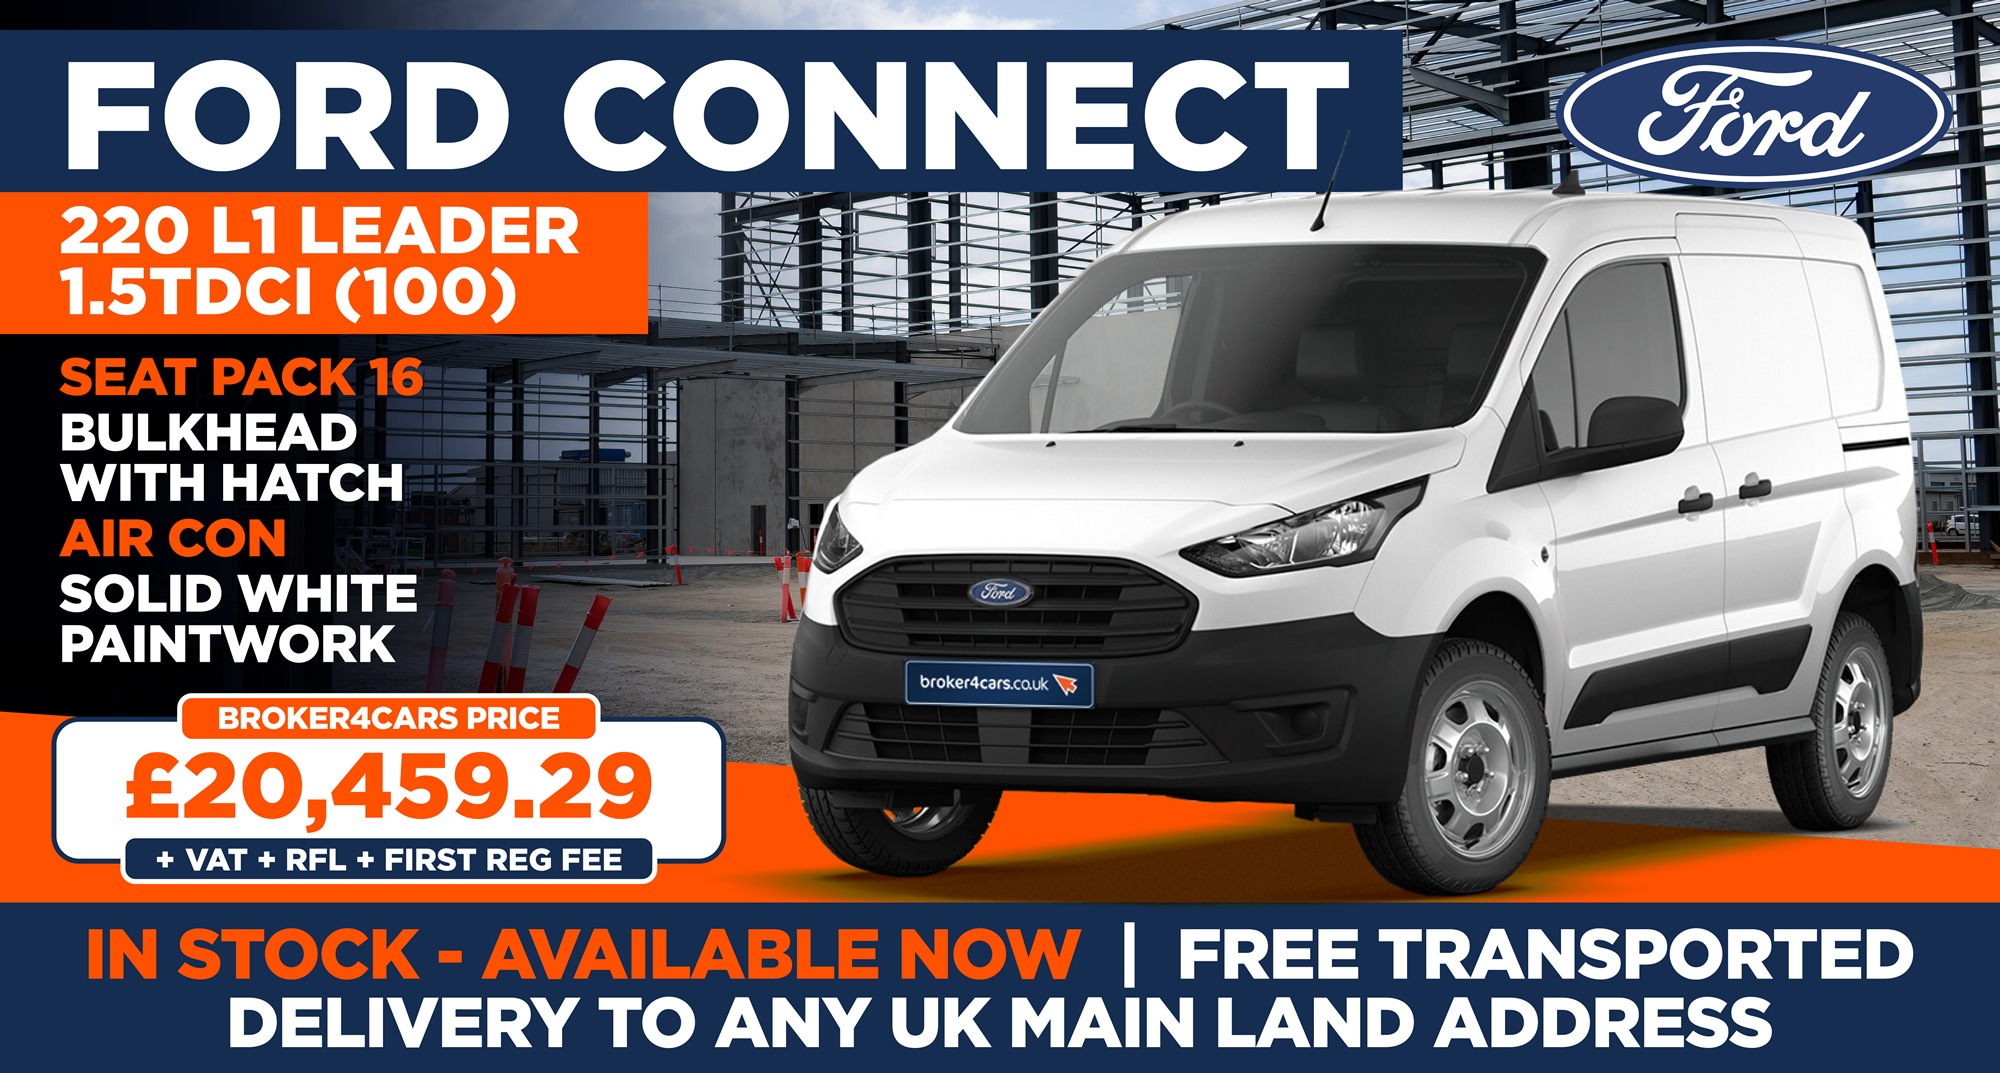 Ford Connect 220 L1 Leader 1.5TDCI (100)Seat Pack 16, Bulkhead with Hatch, Air Con, Solid White Paintwork